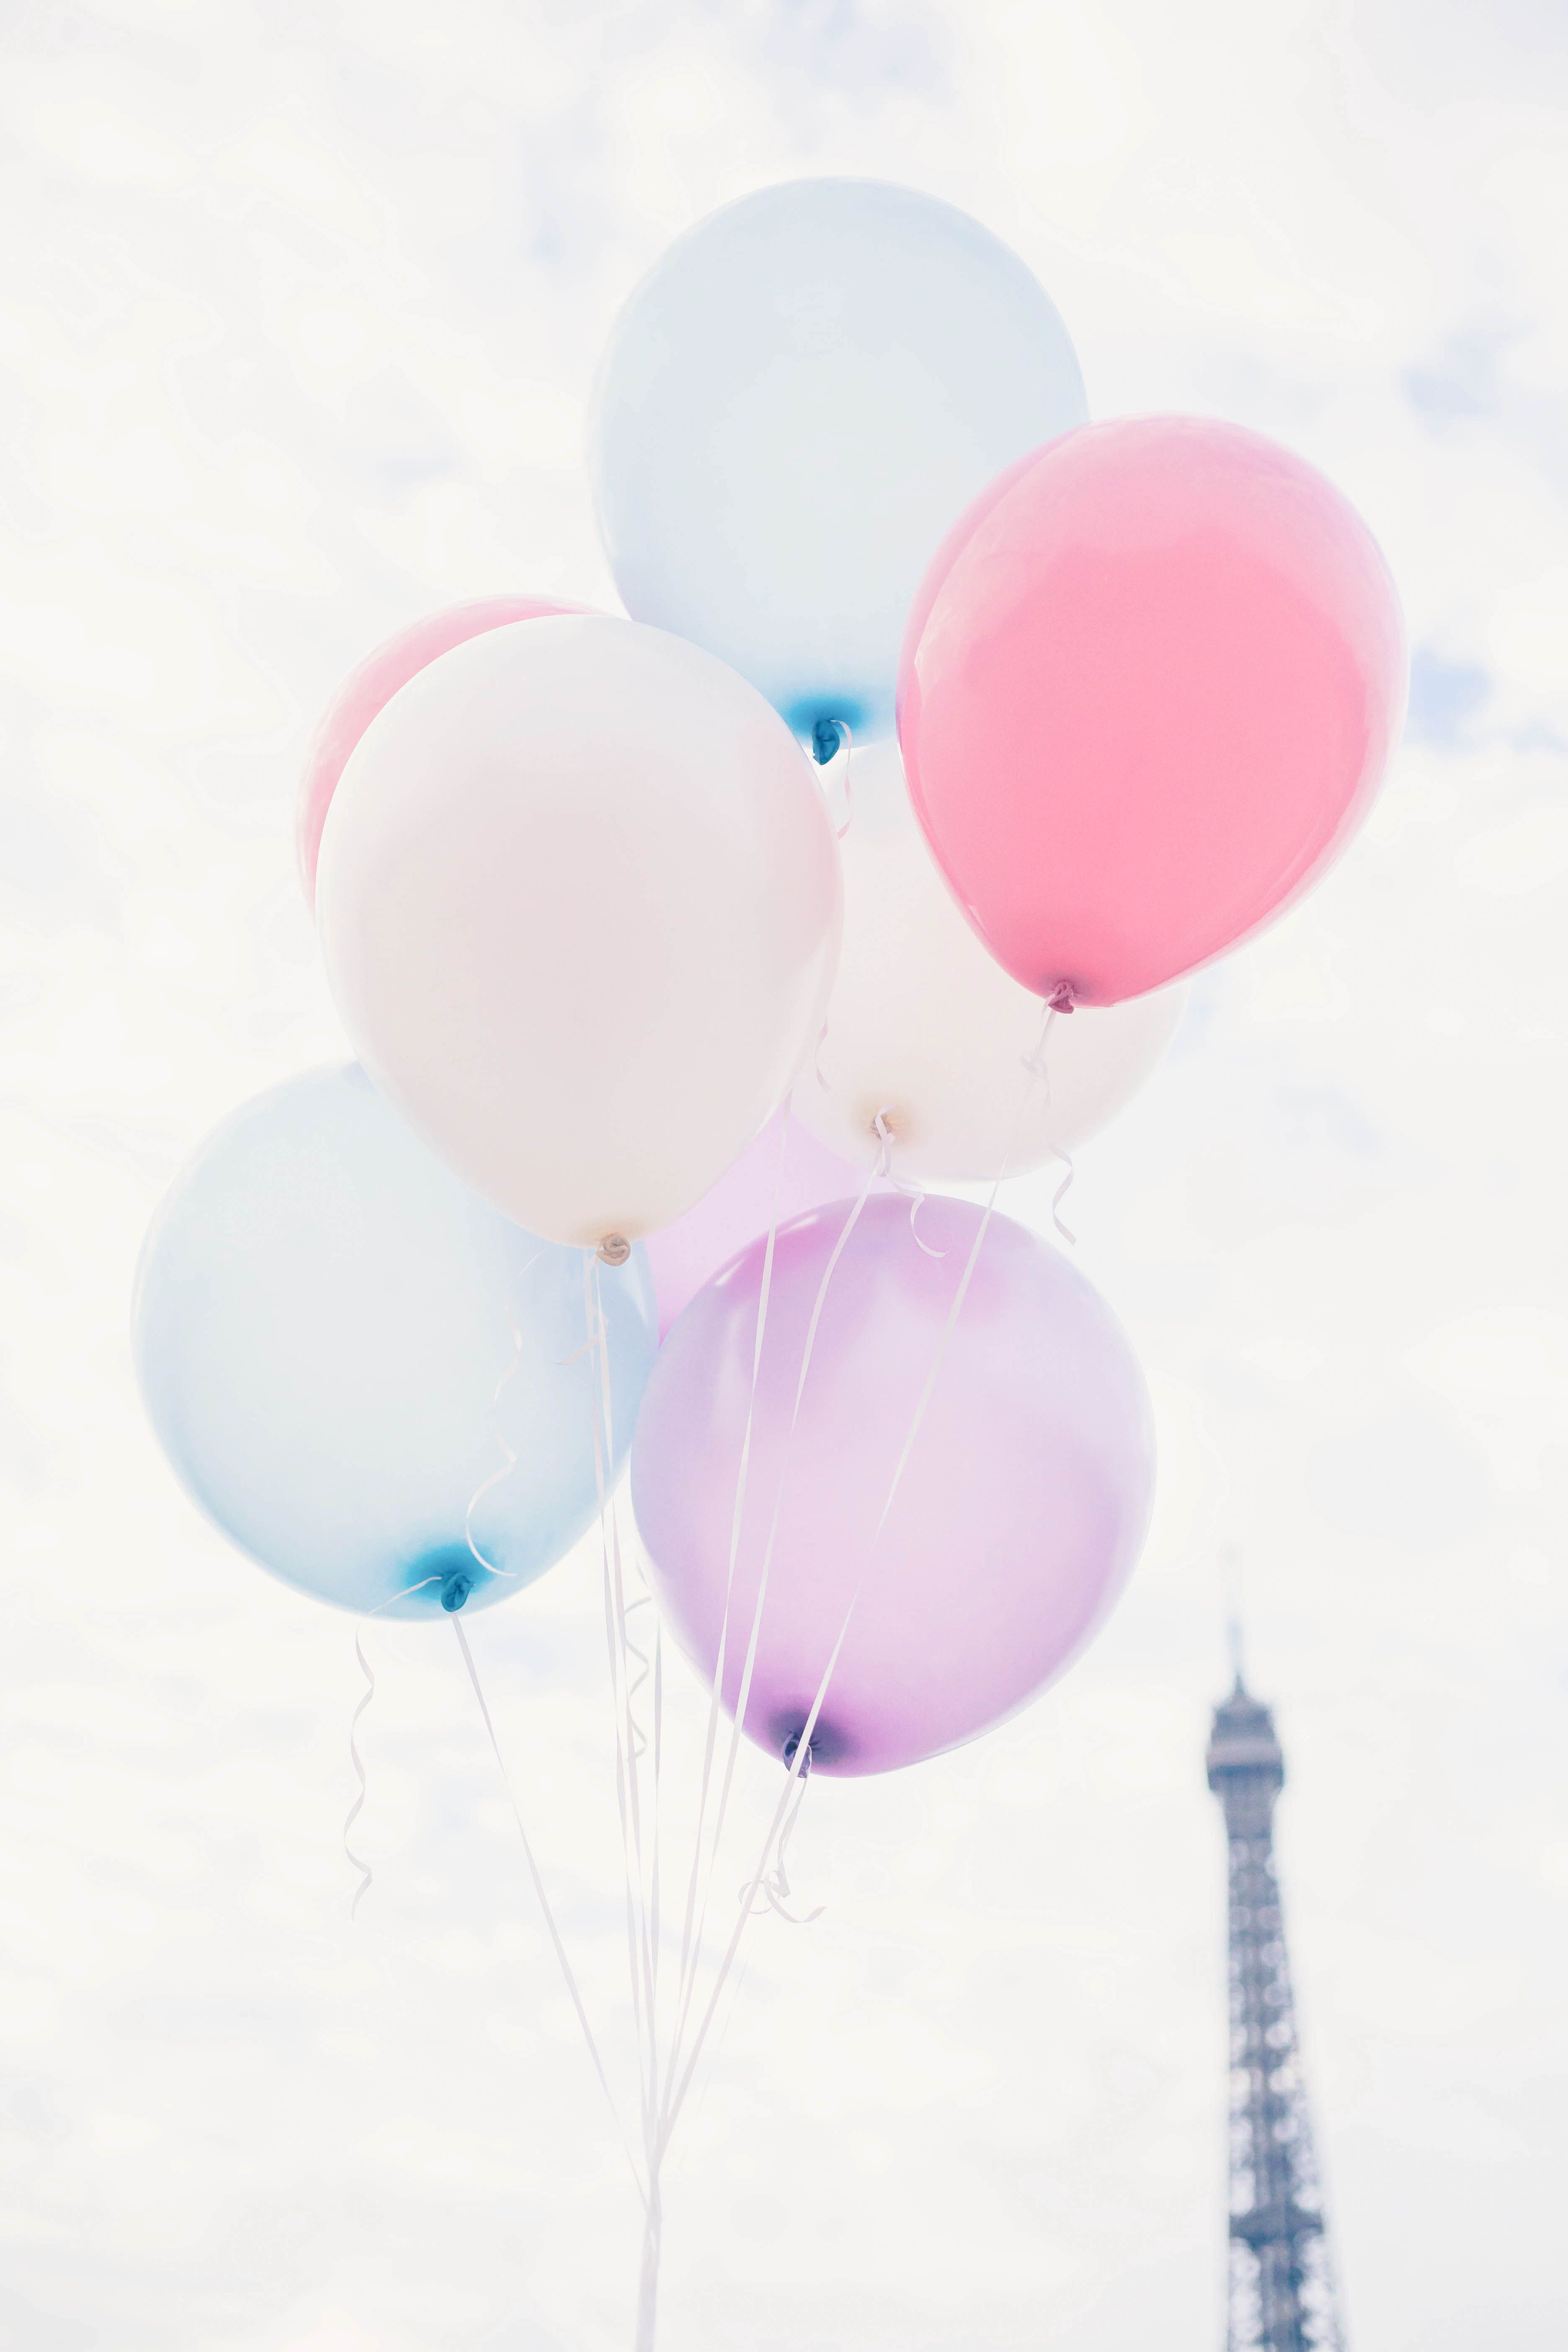 Free download Pastel Balloons Wallpaper Top Free Pastel Balloons Background [3744x5616] for your Desktop, Mobile & Tablet. Explore Balloons Wallpaper. Birthday Balloons Wallpaper, Balloons Wallpaper Desktop, Happy Birthday Balloons Wallpaper